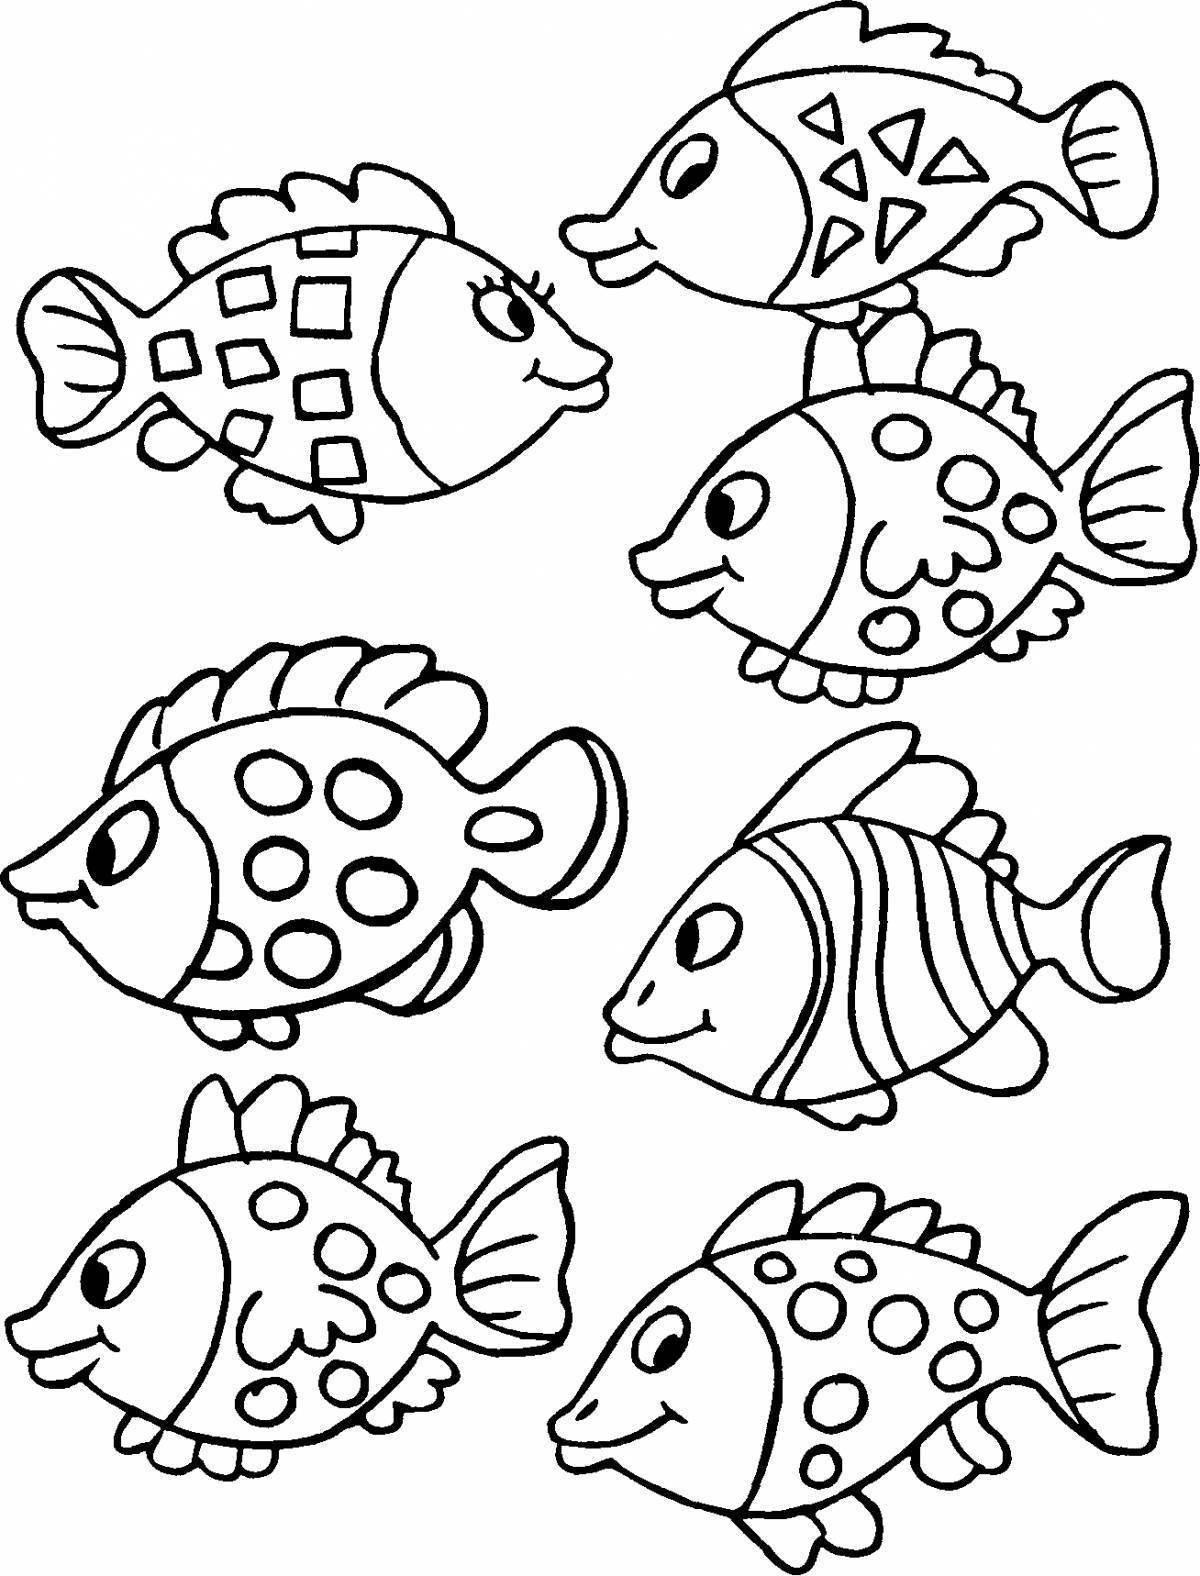 Cute fish coloring pages for 5-6 year olds